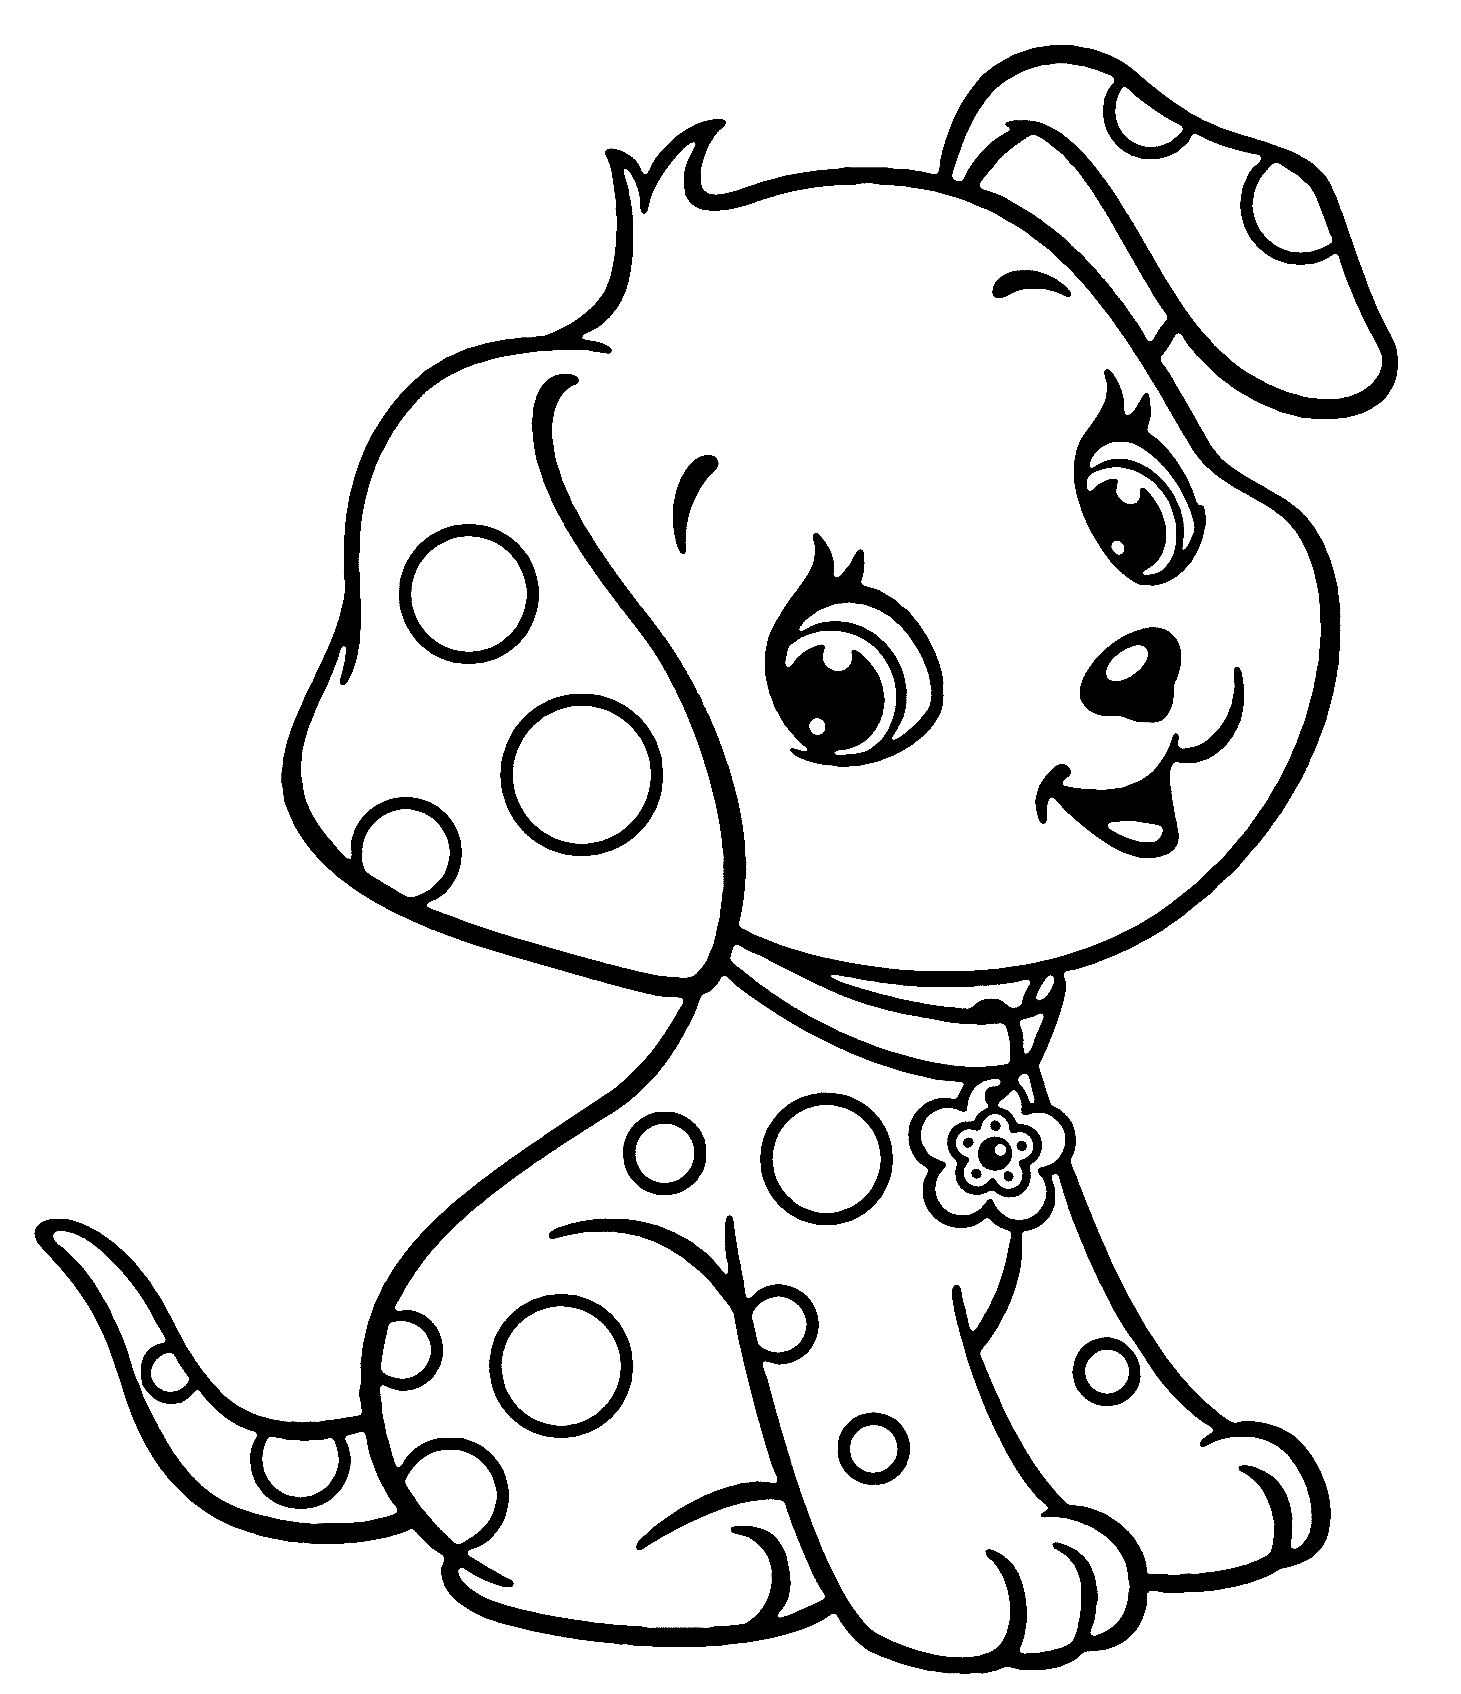 Puppy coloring pages printable for free download